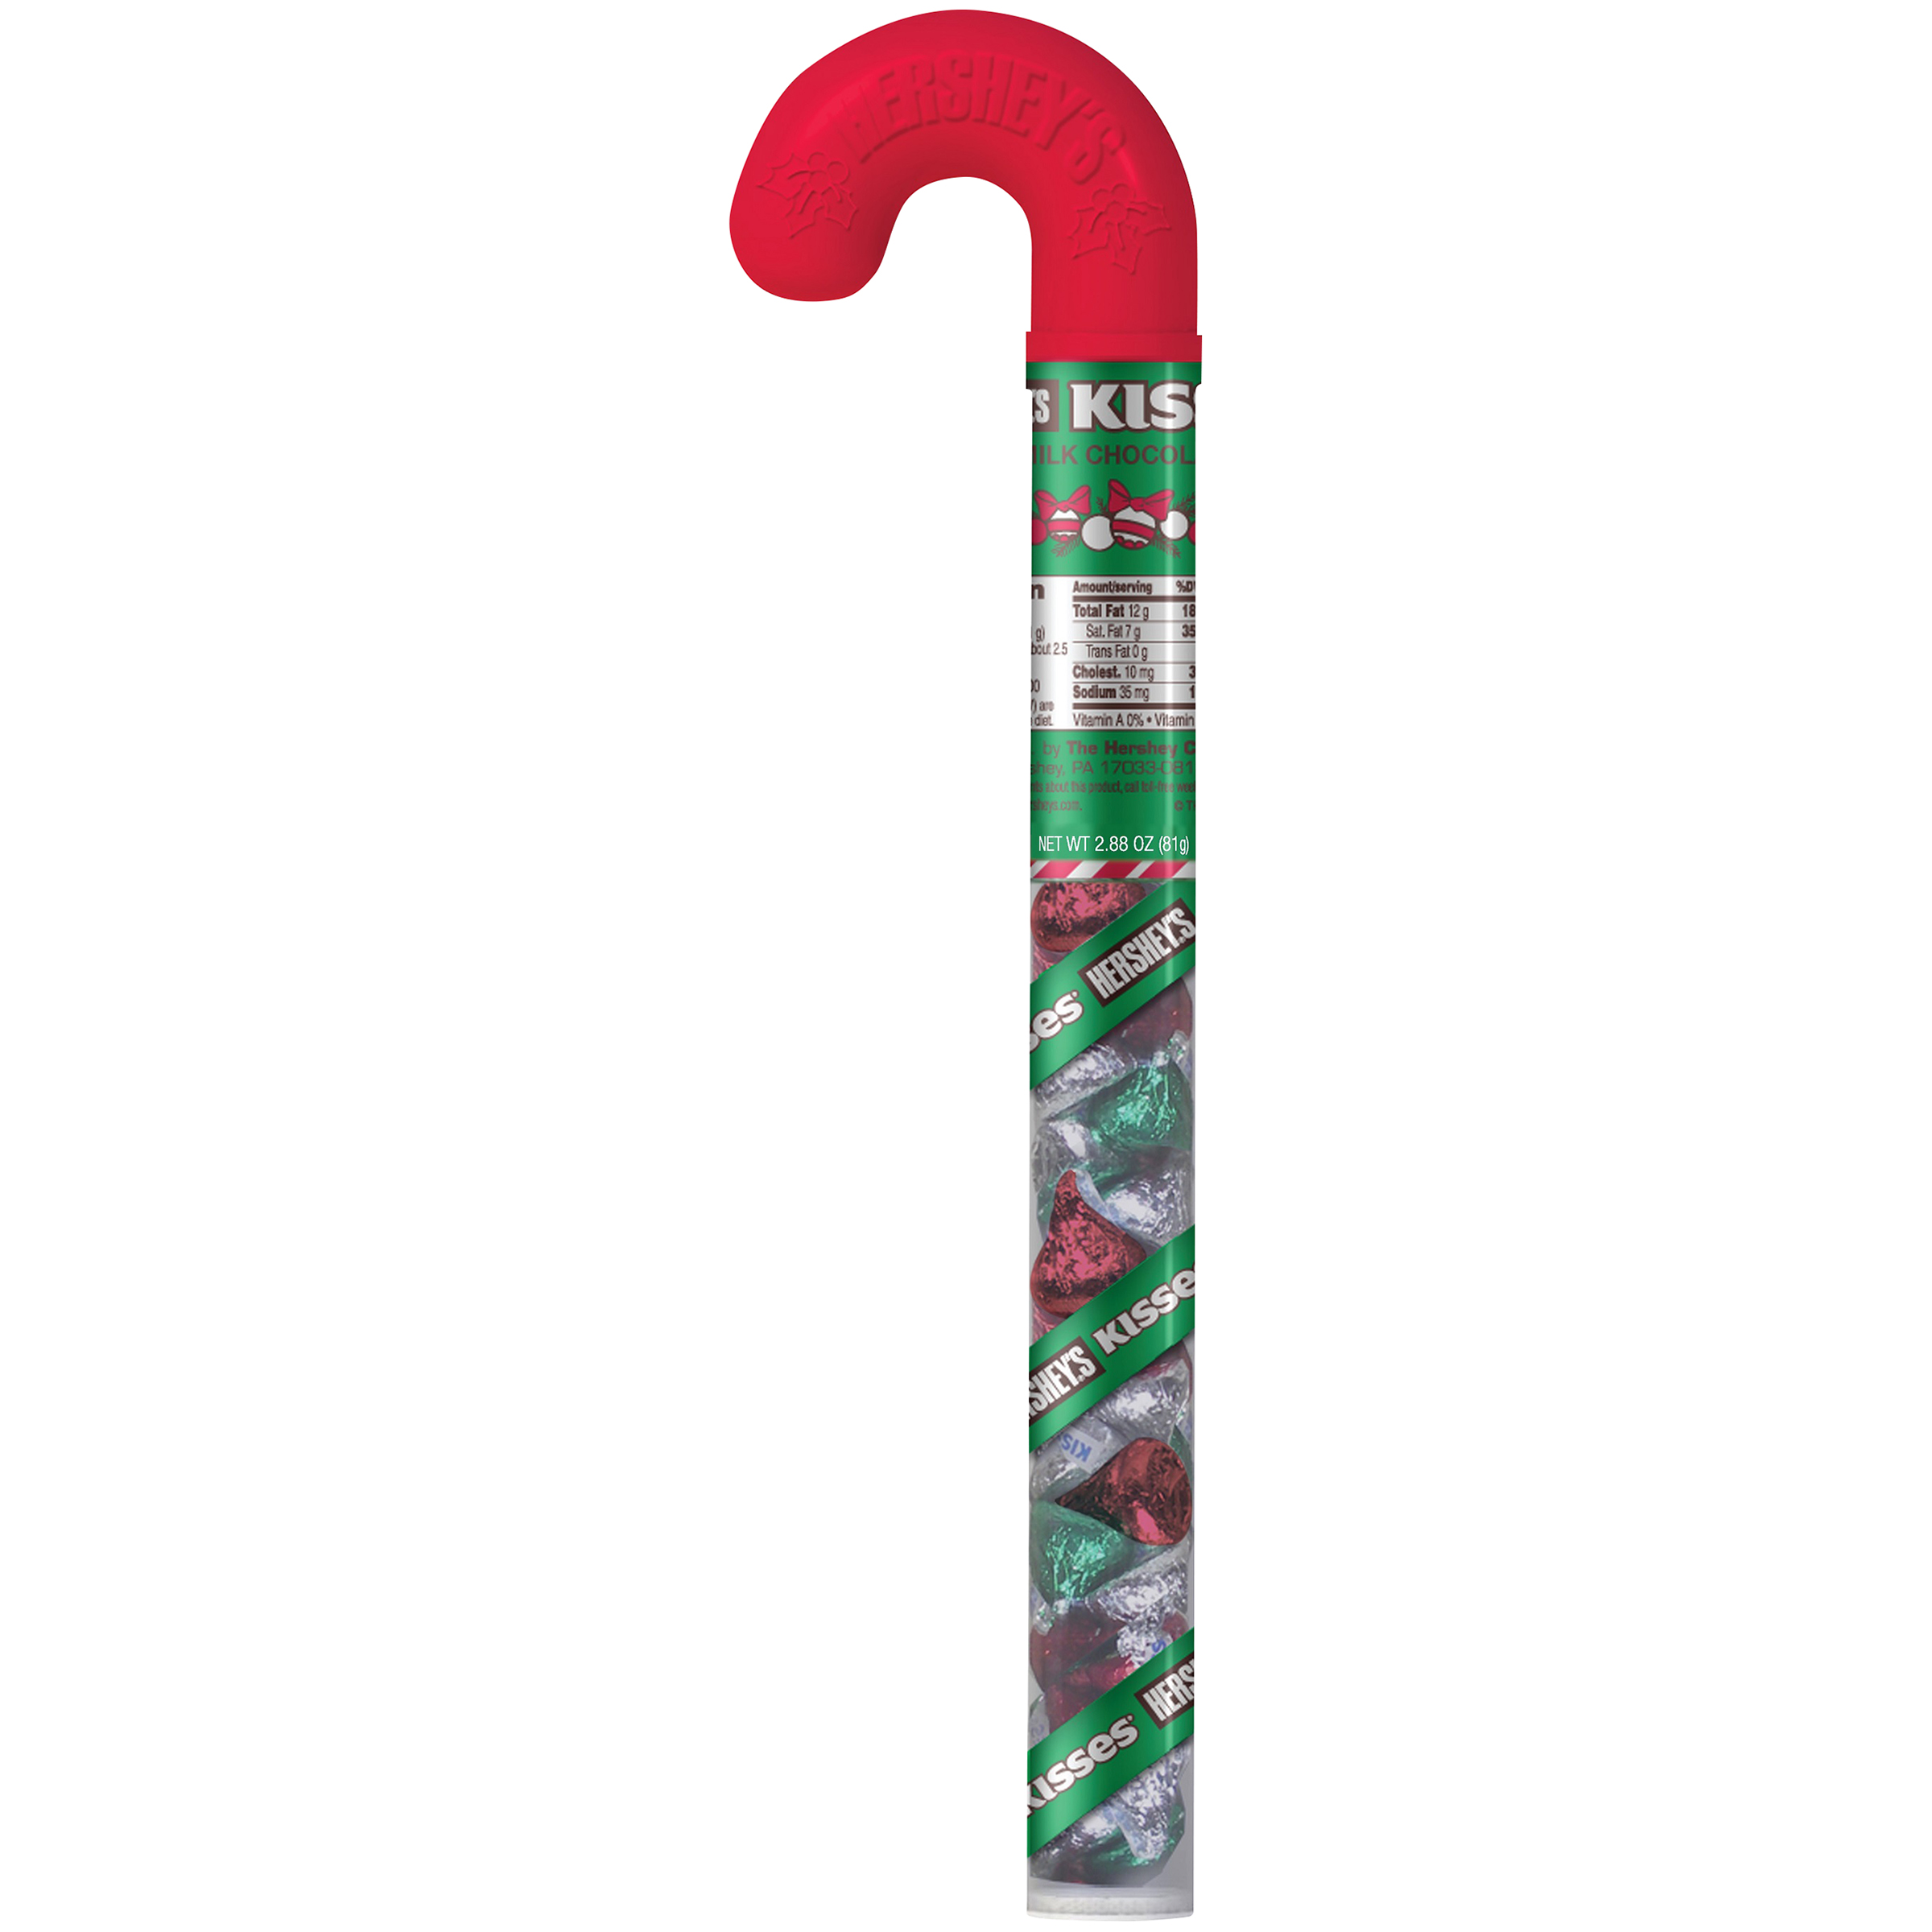 0034000133819 - KISSES HOLIDAY MILK CHOCOLATES CANDY FILLED CANE 2.88 OZ. CONTAINER